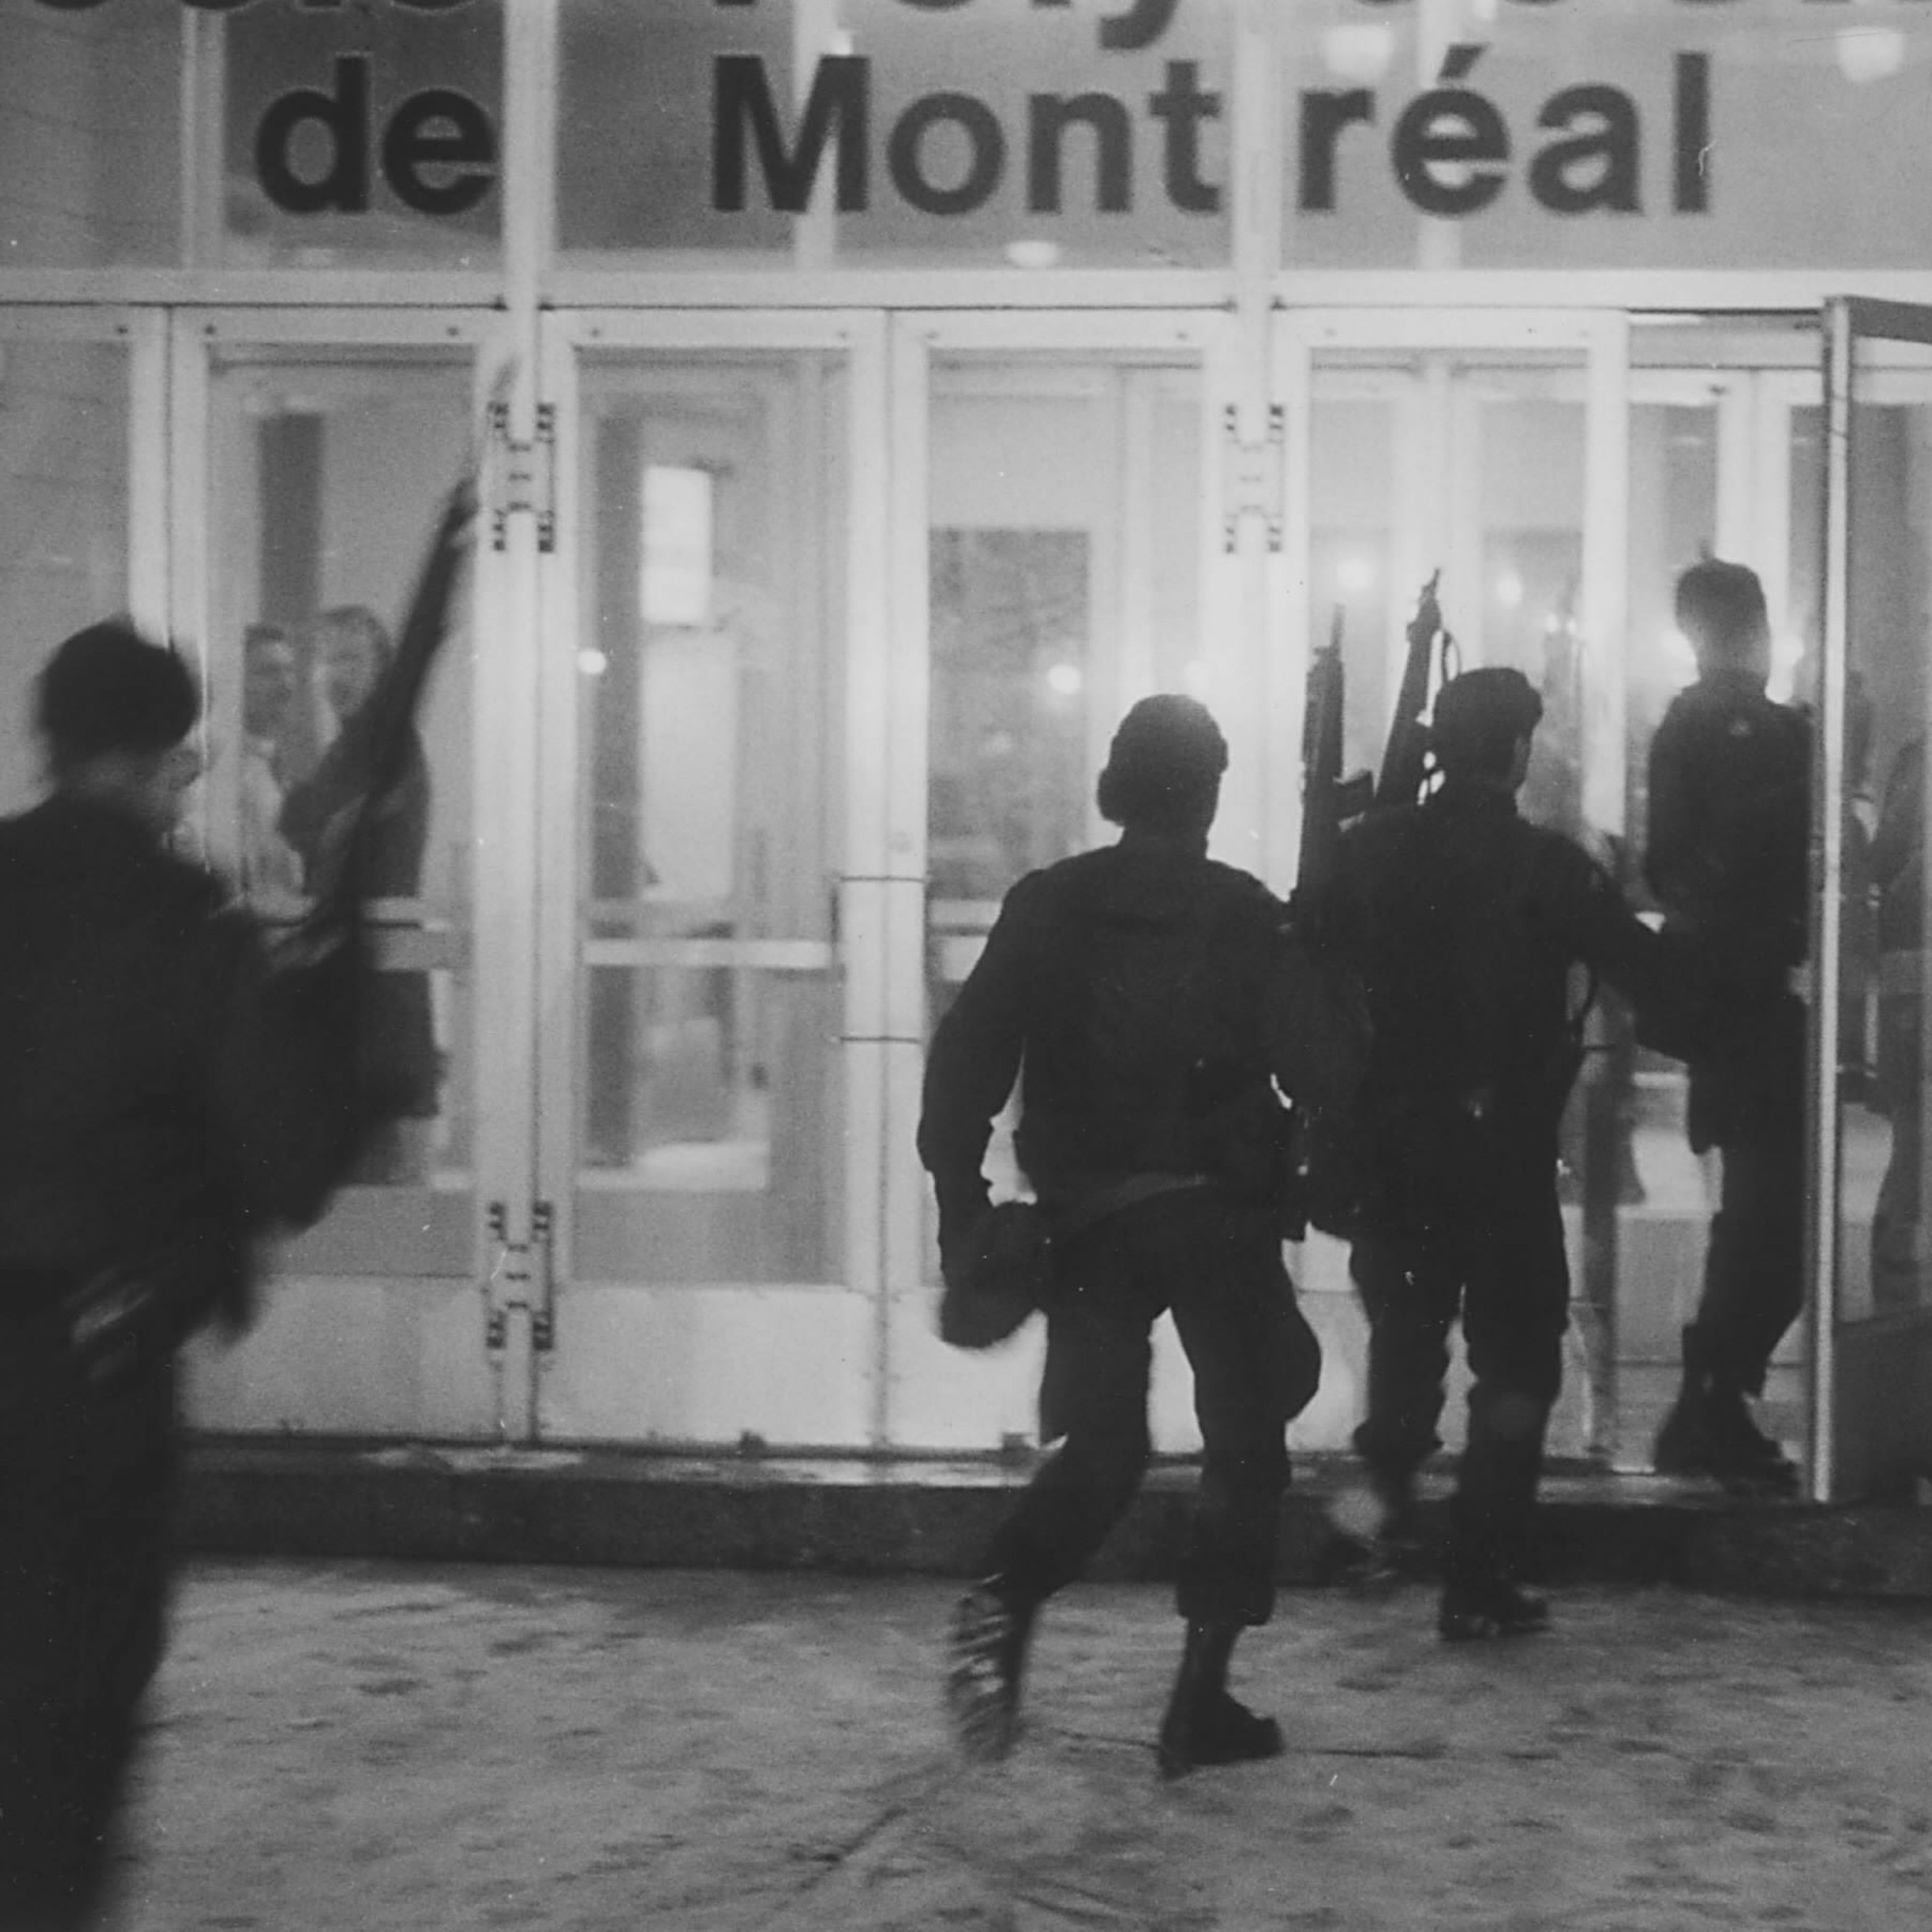 Episode 67: The Montreal Massacre, Part Two -- Aftermath